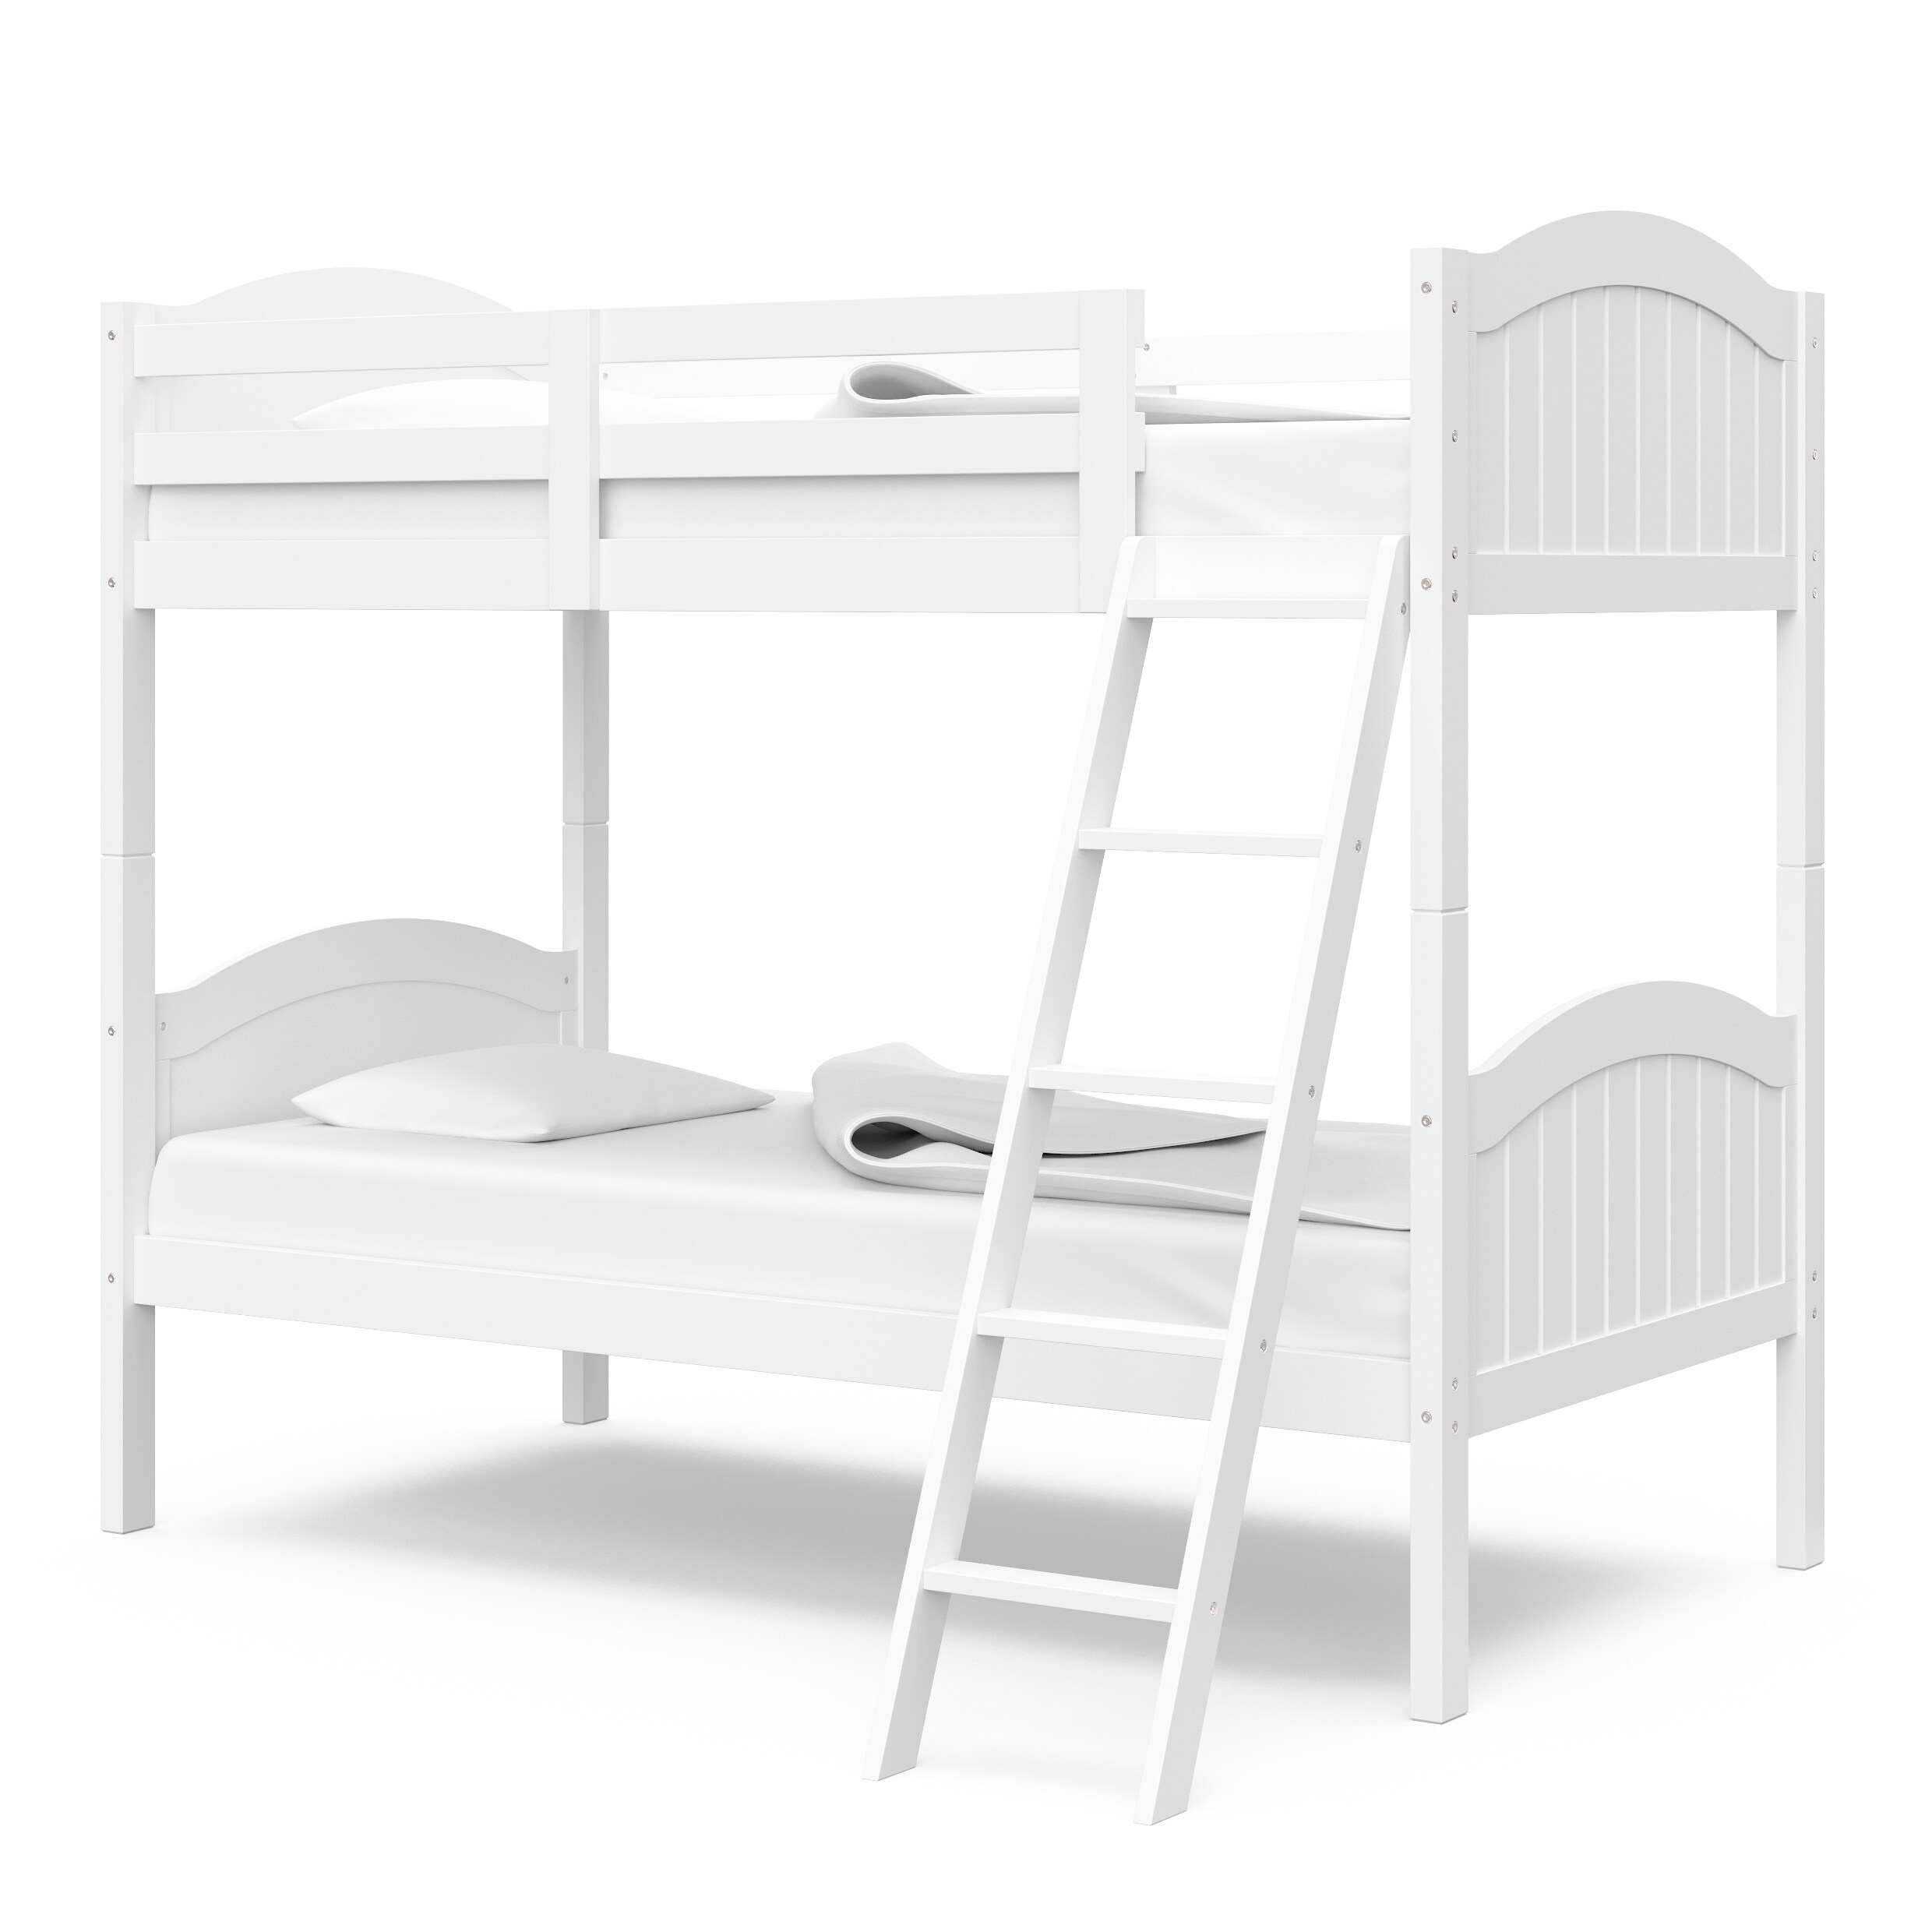 grey and white bunk beds